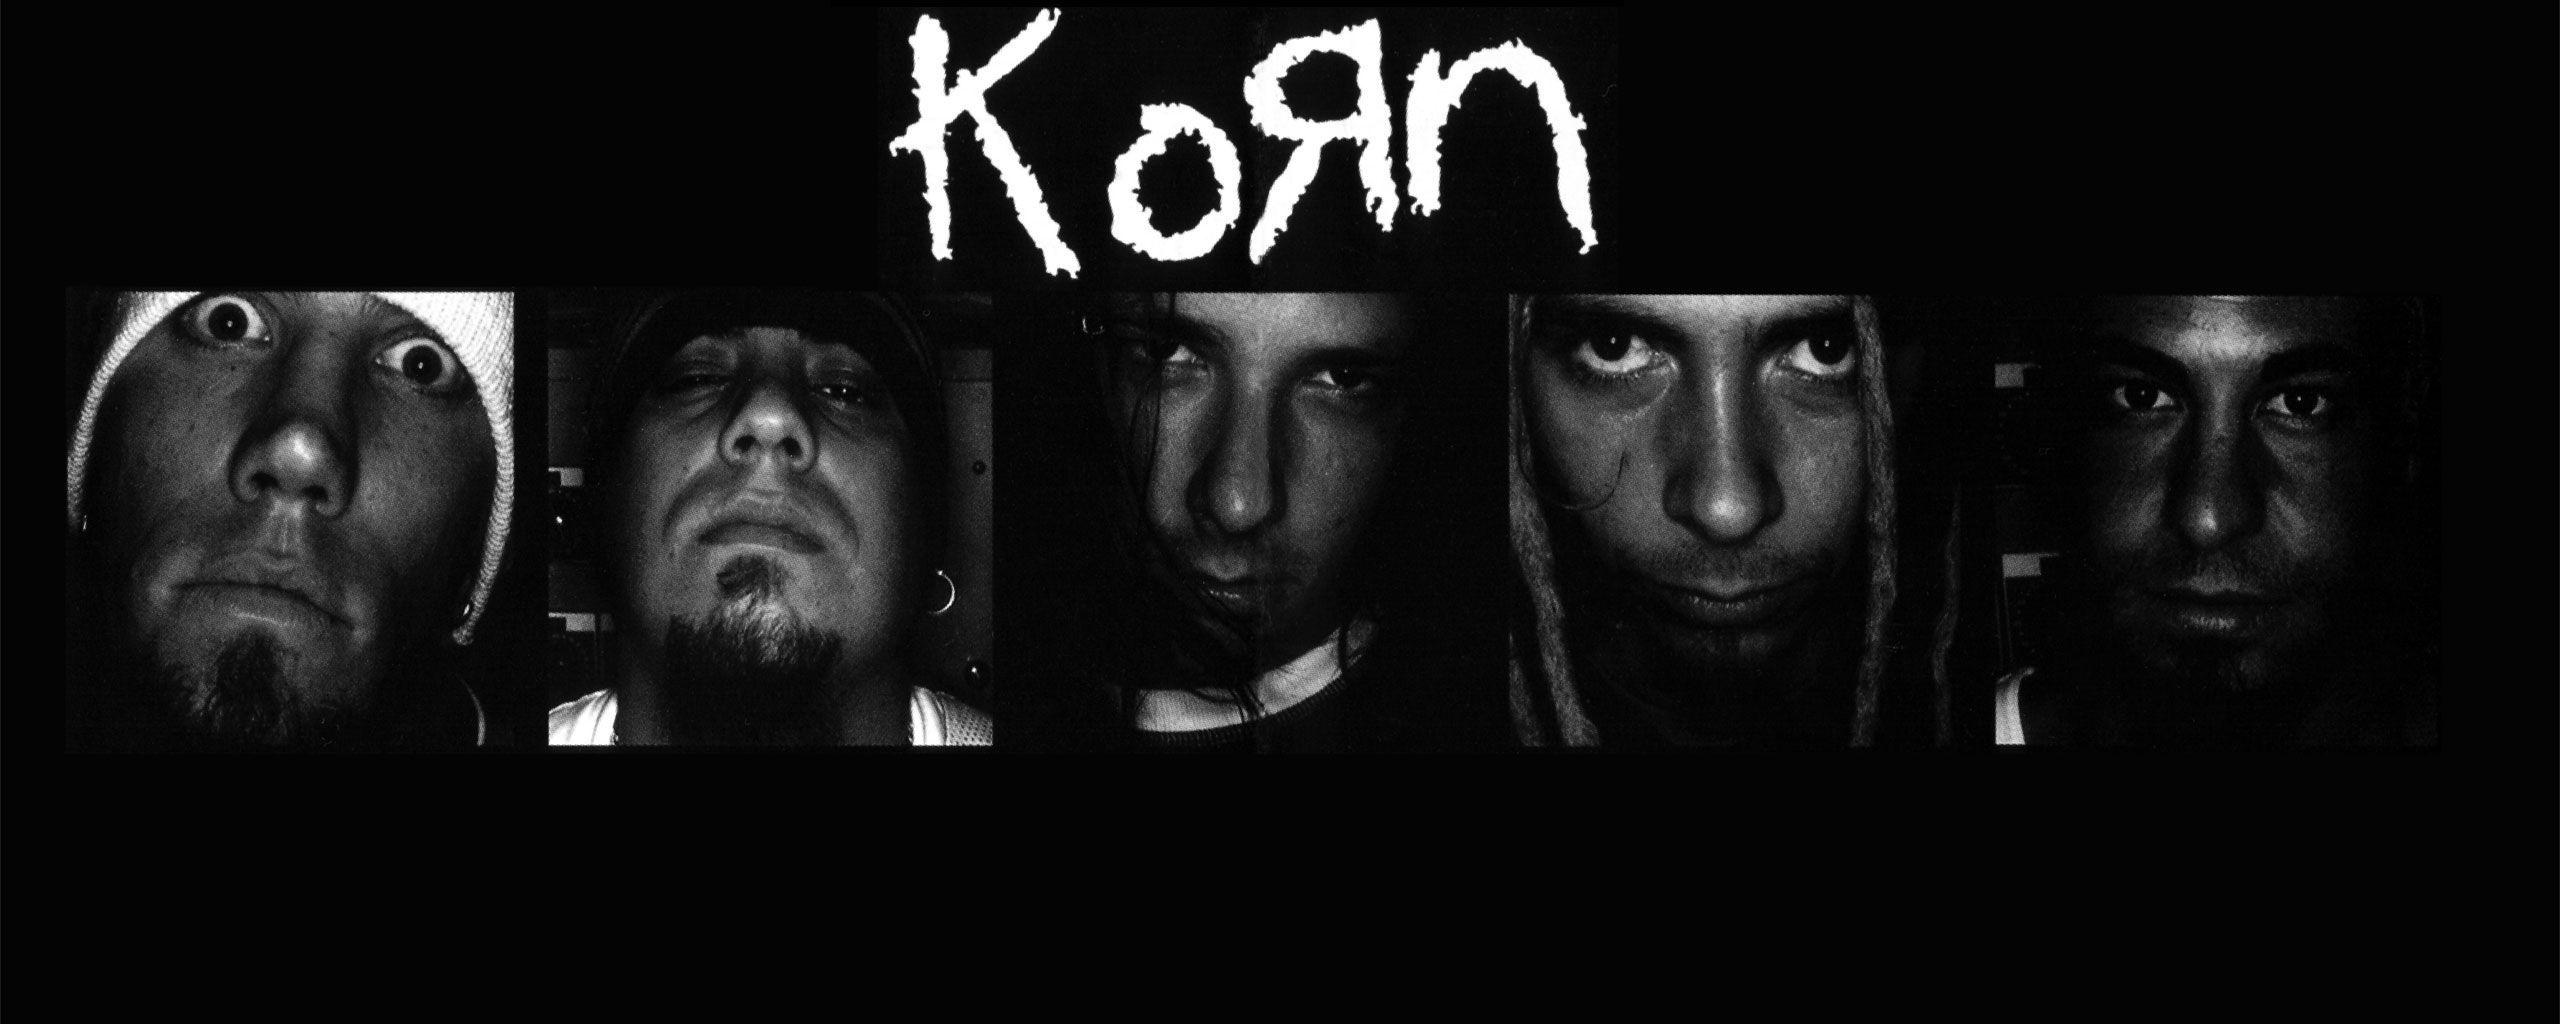 Korn when they were meth users